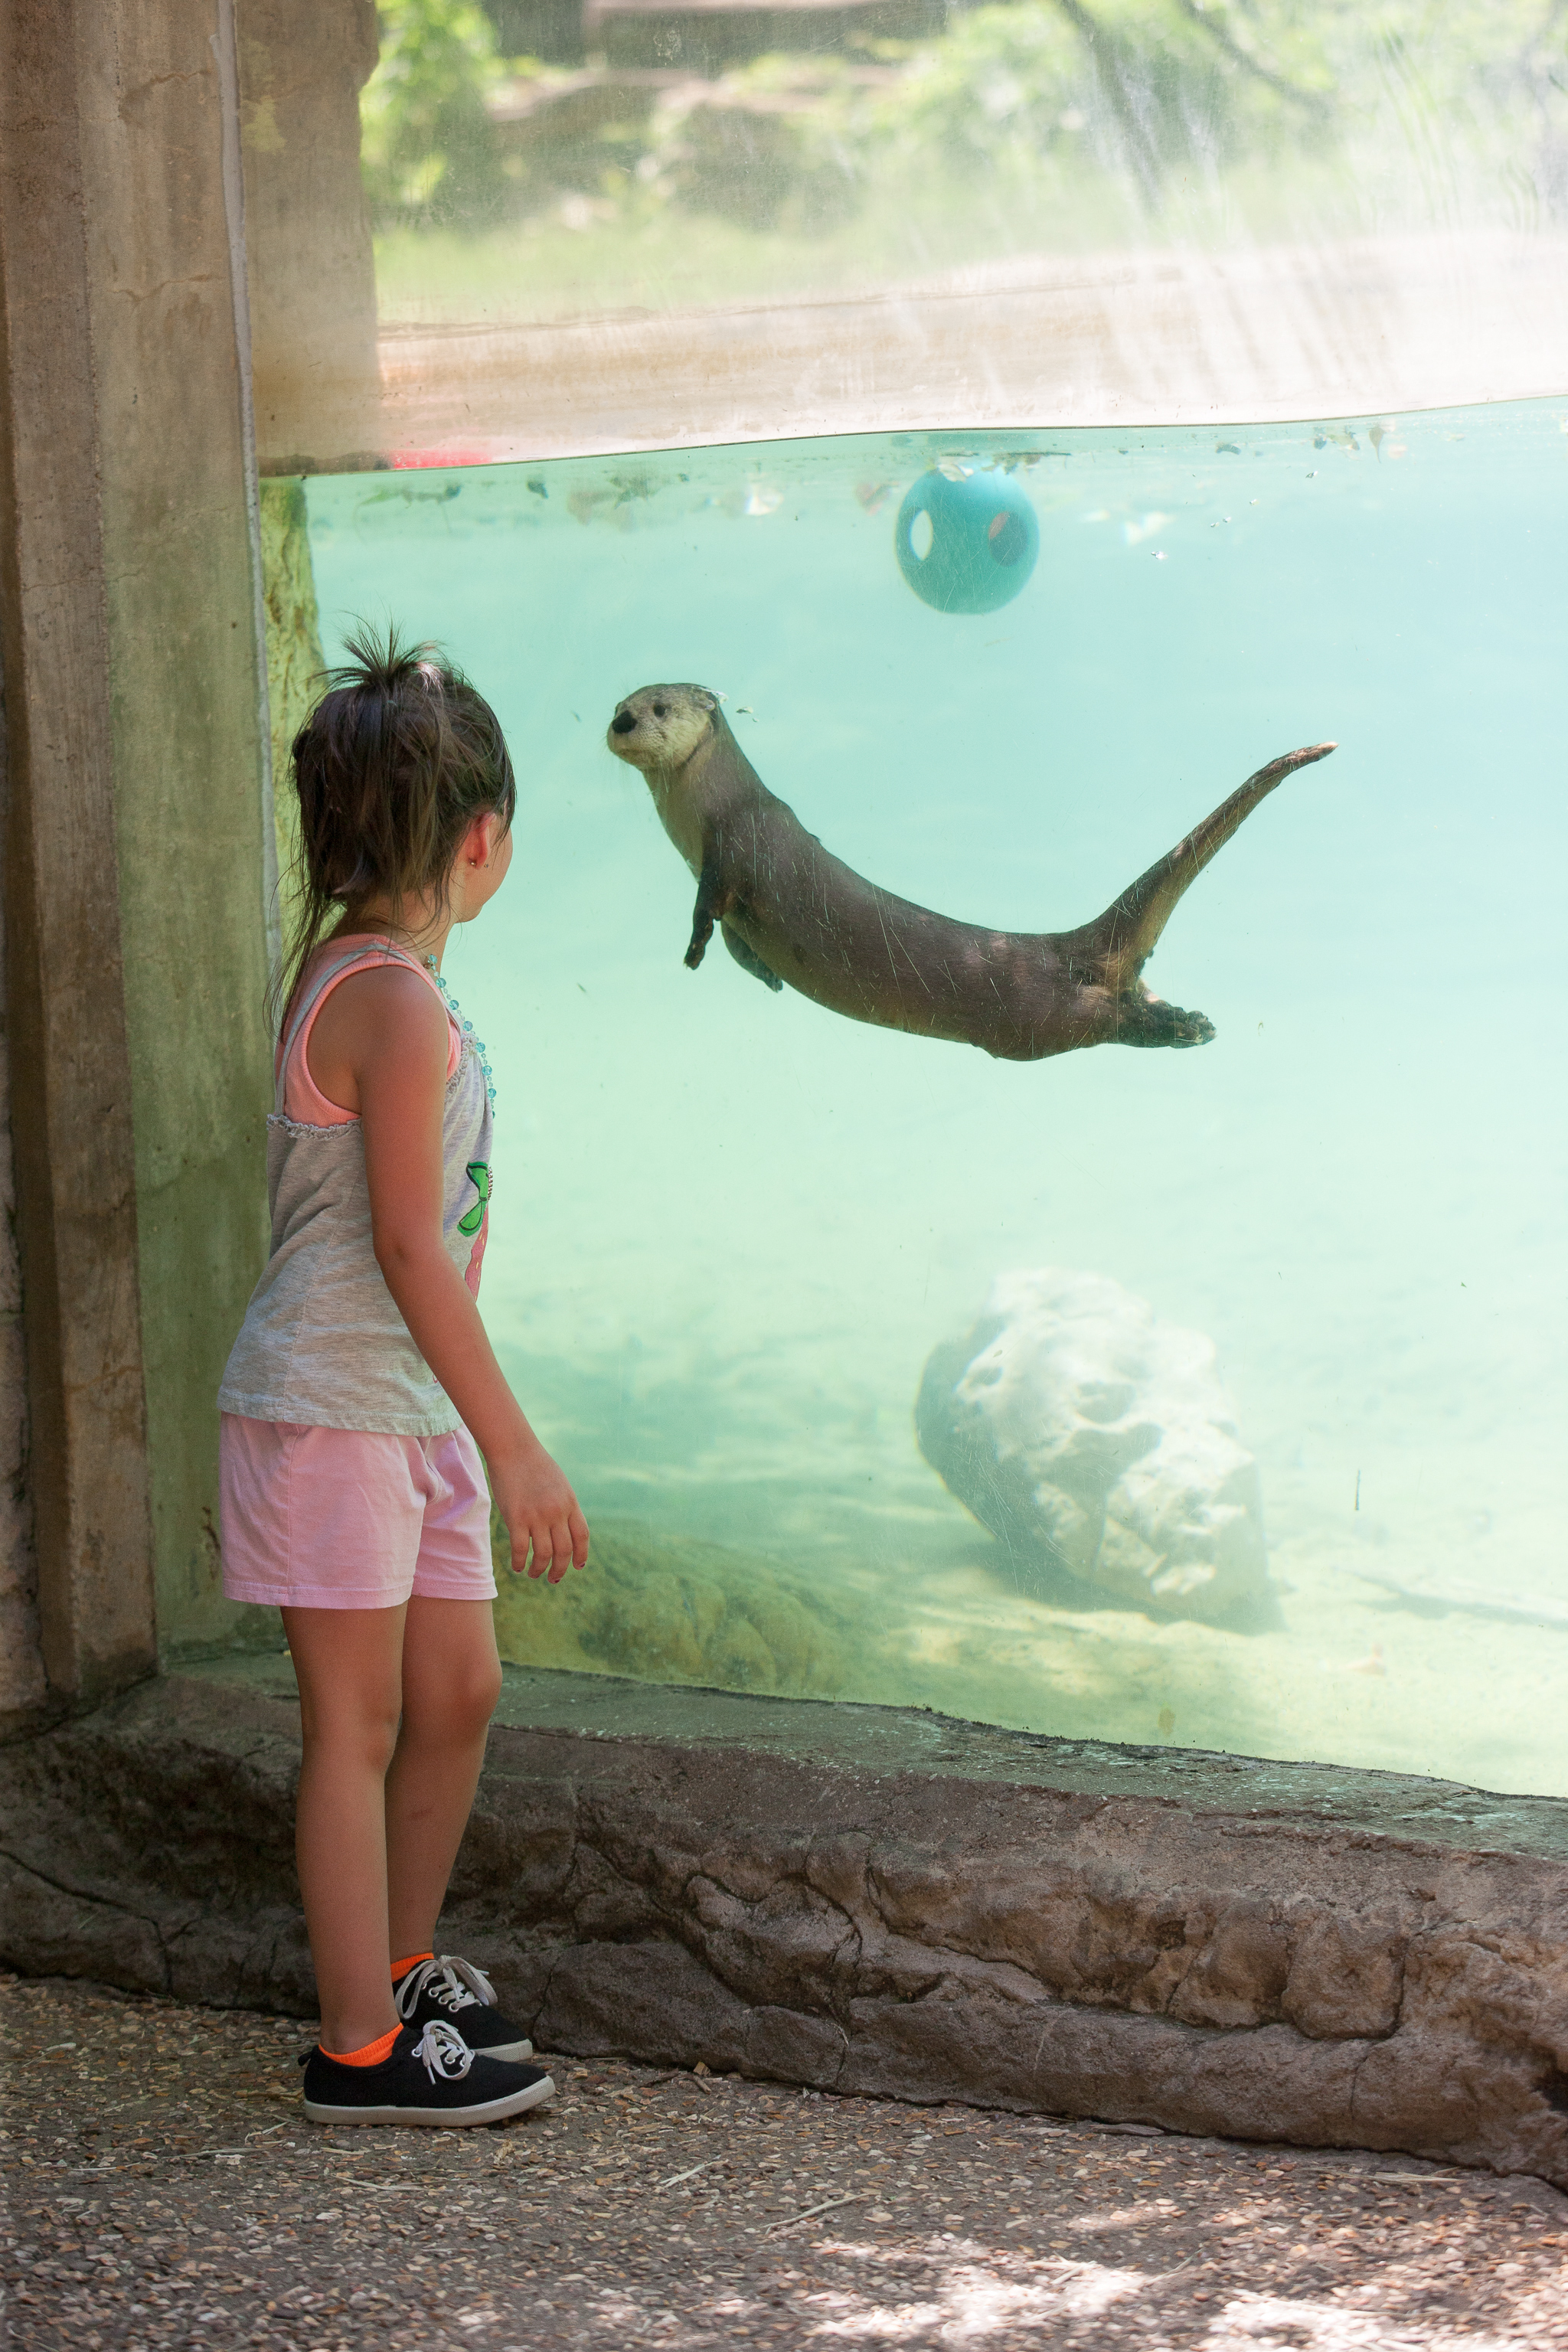 Otter and a Little Girl Stop to Get a Good Look at Each Other